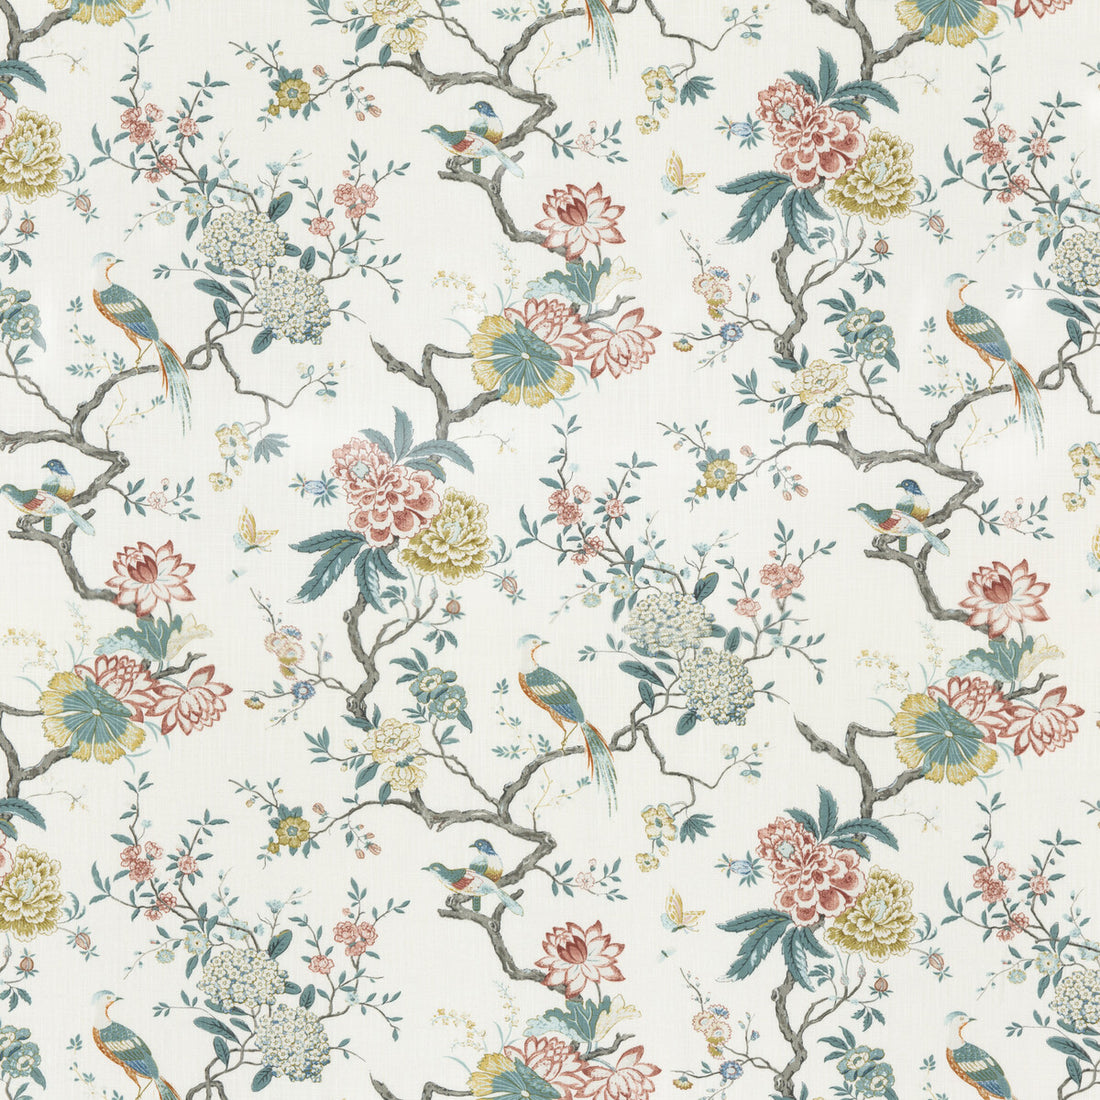 Oriental Bird Signature fabric in teal color - pattern BP10771.5.0 - by G P &amp; J Baker in the Signature Prints collection